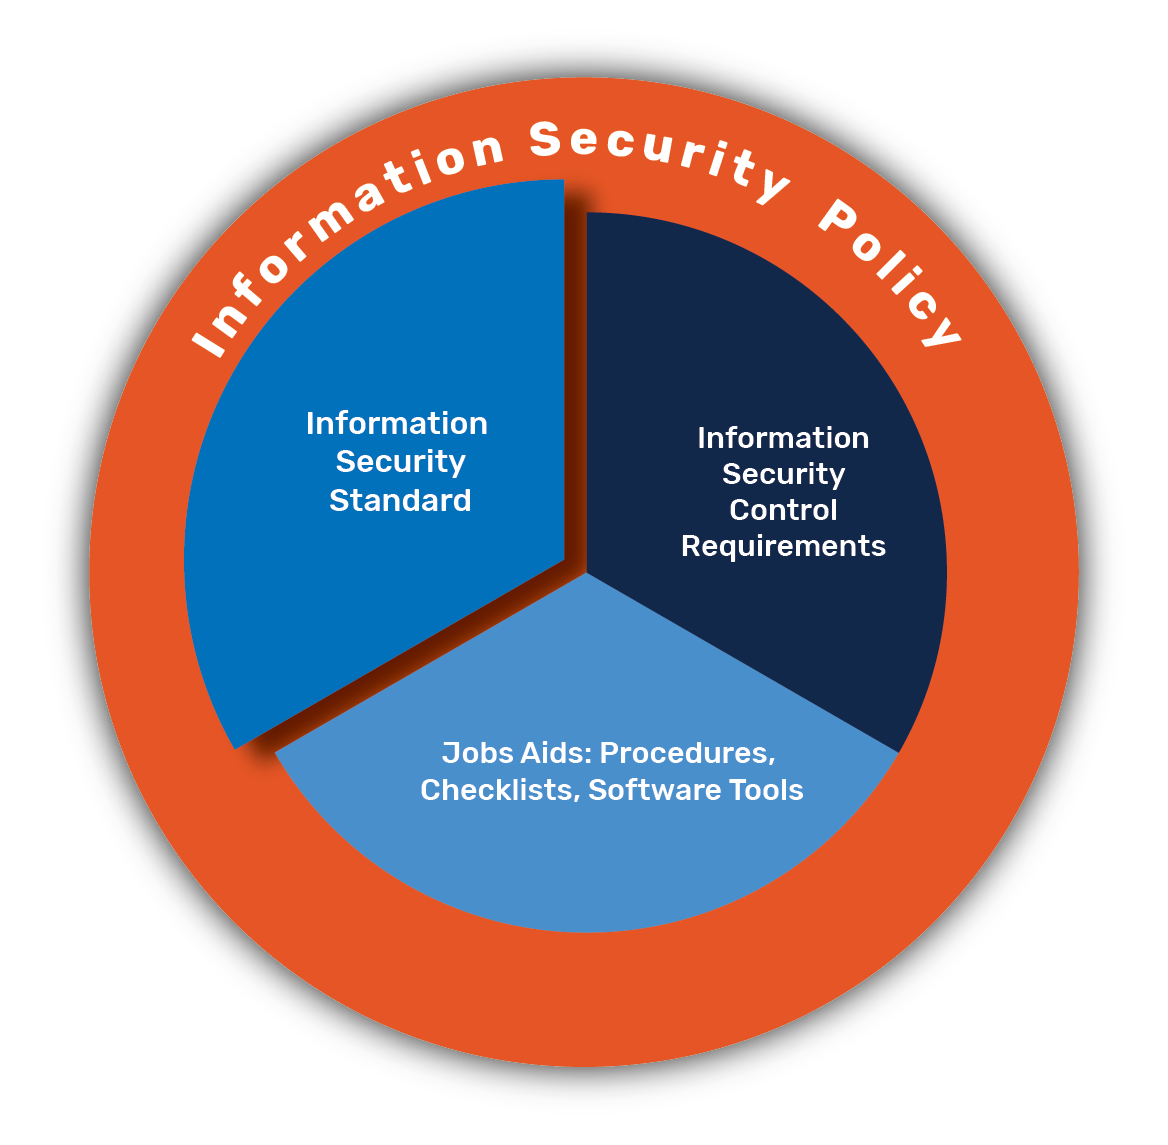 Security Program logo featuring the Data Policy and Information Security Policy circling the Information Security standards (highlighted), control requirements, and job aids.